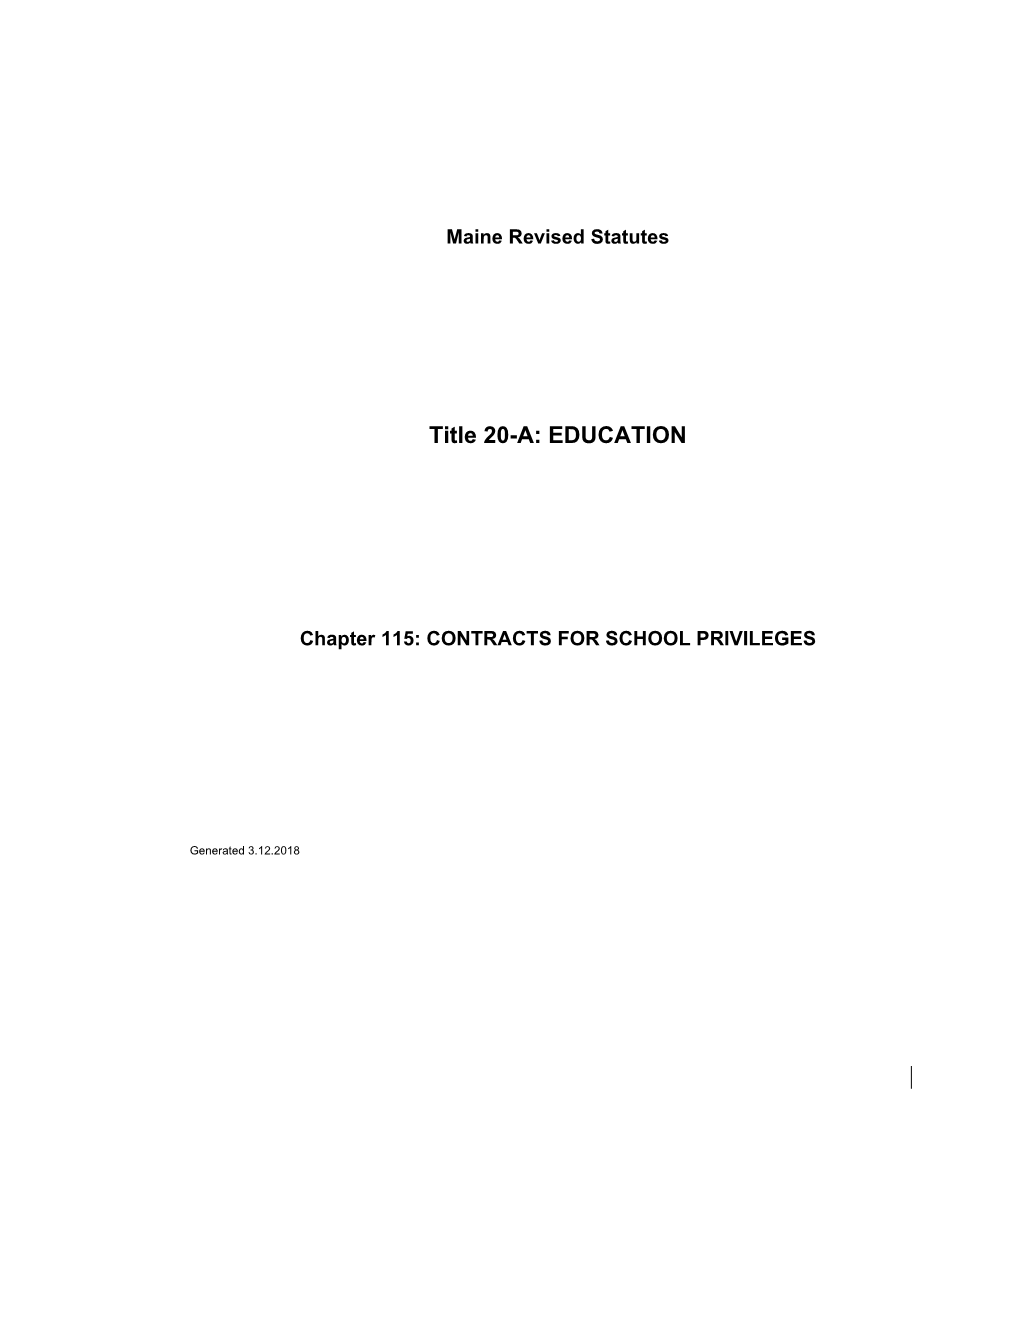 Chapter115: CONTRACTS for SCHOOL PRIVILEGES